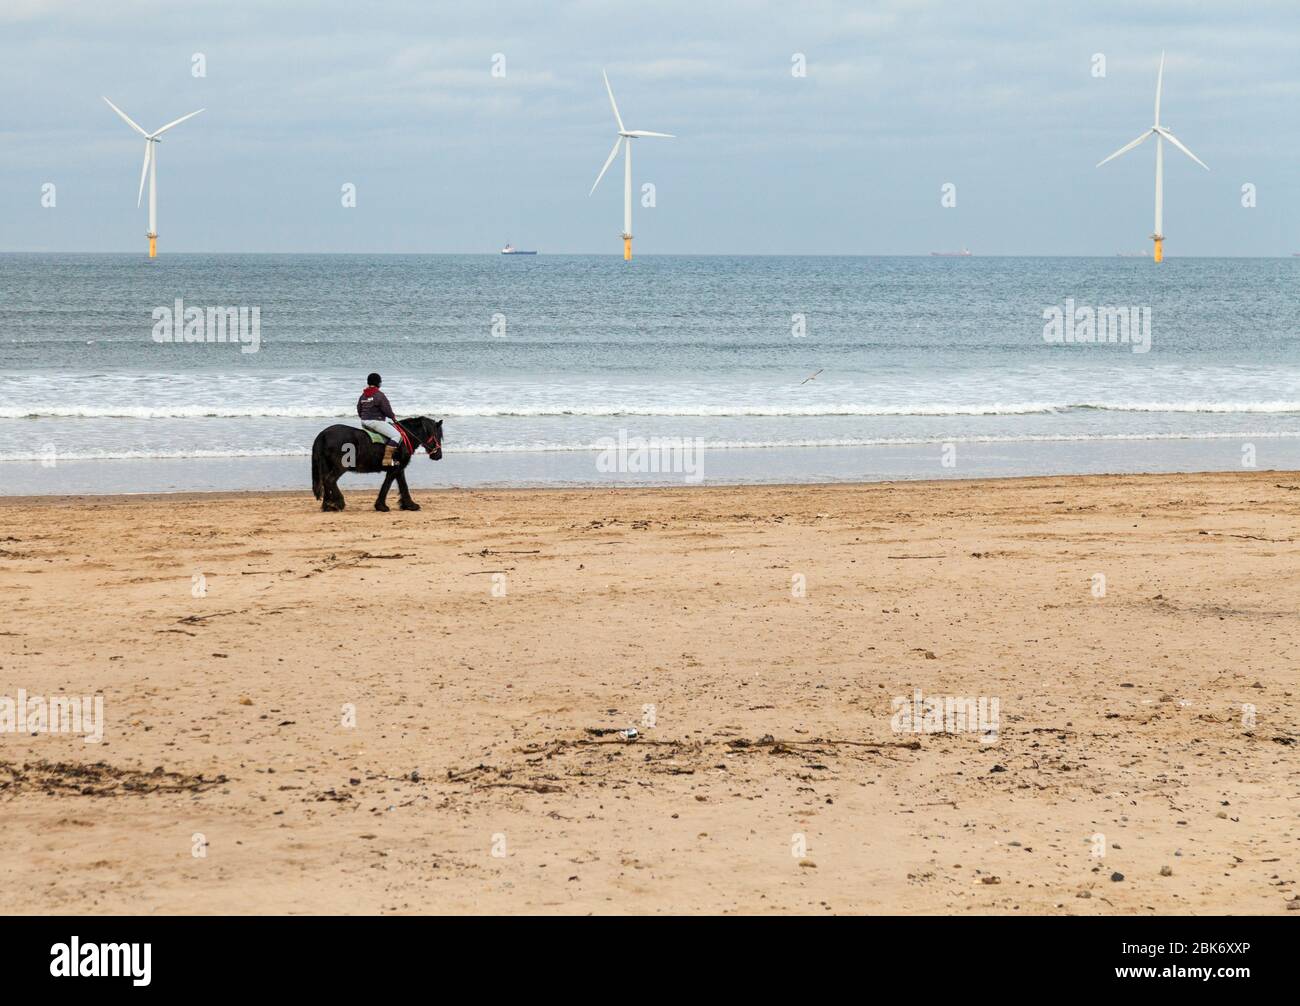 A woman riding a horse on Redcar beach with the wind turbines in the background in north east England,UK Stock Photo